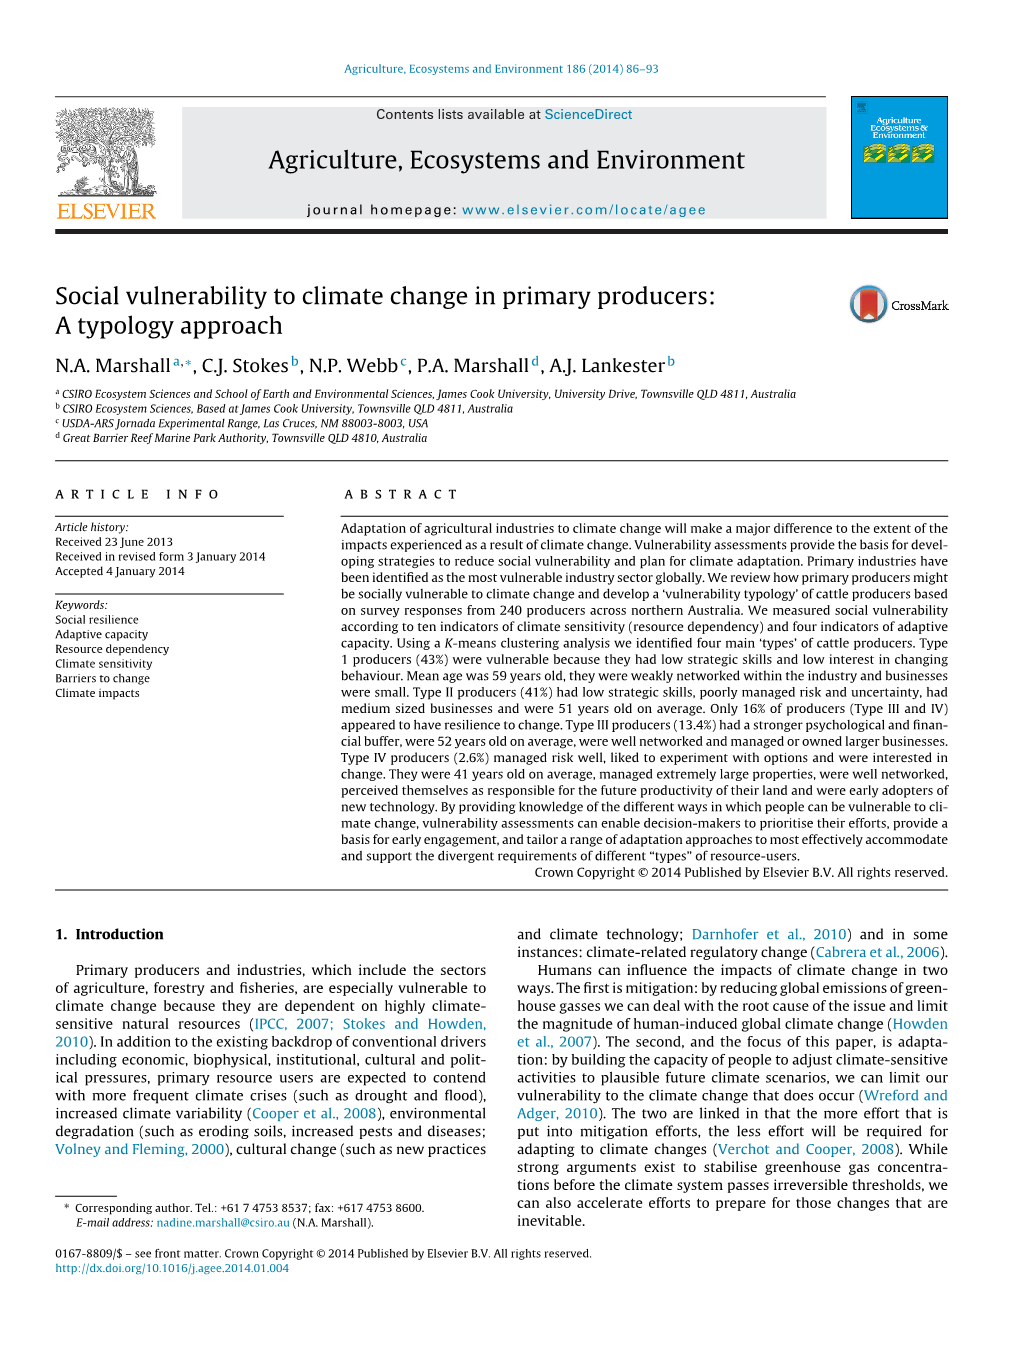 Social Vulnerability to Climate Change in Primary Producers